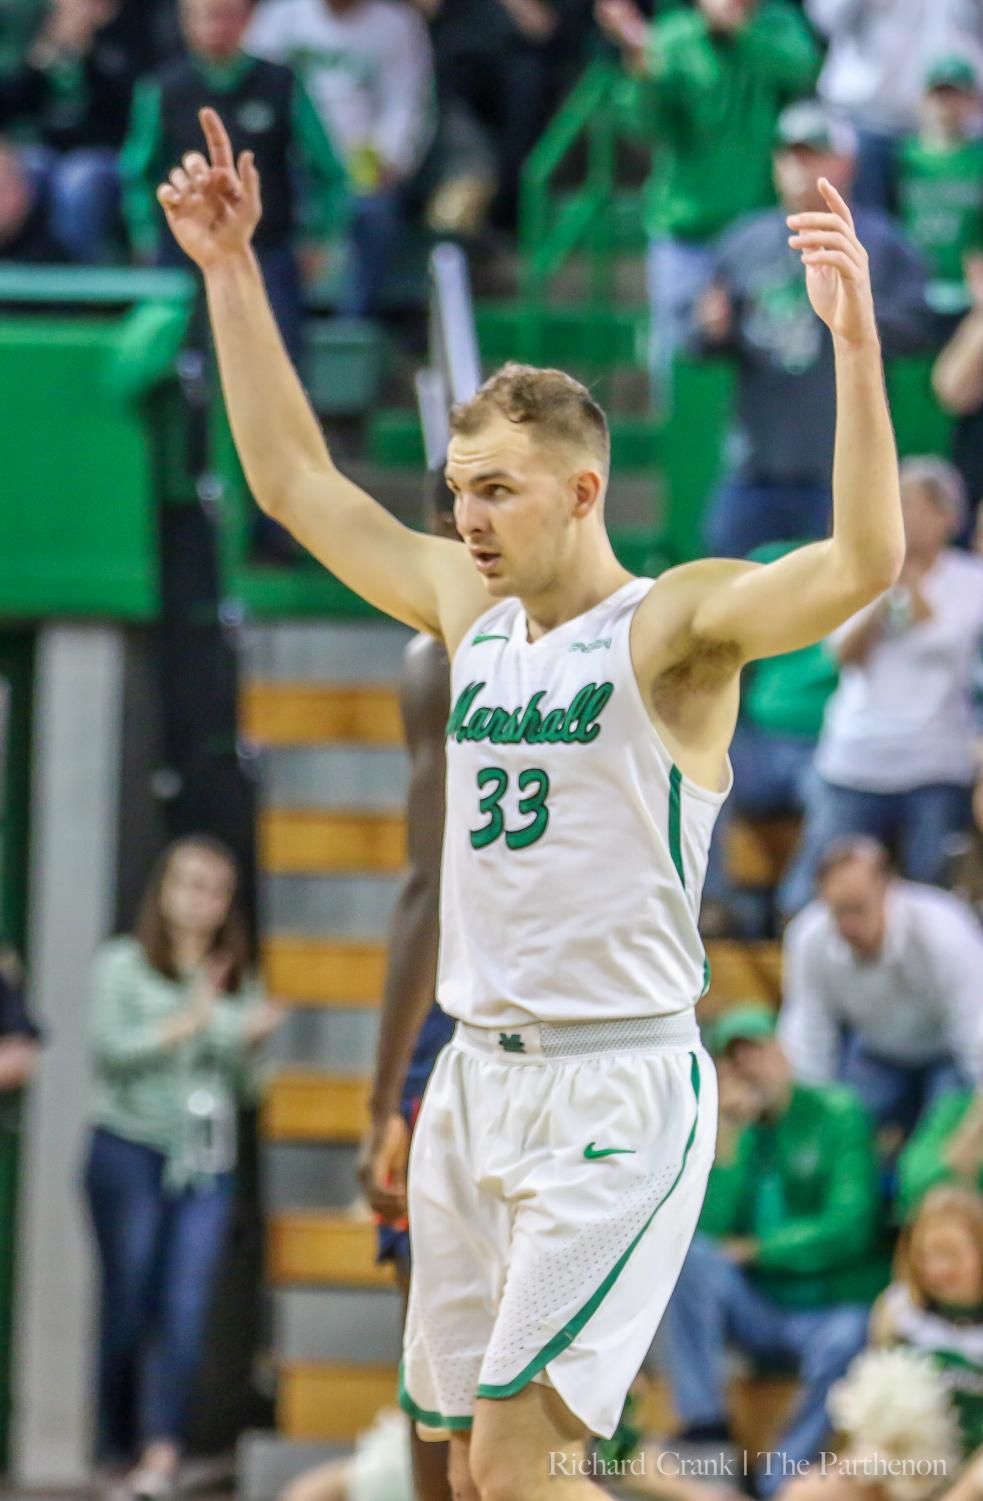 Elmore’s engagement, double-double end regular season with Herd win ...